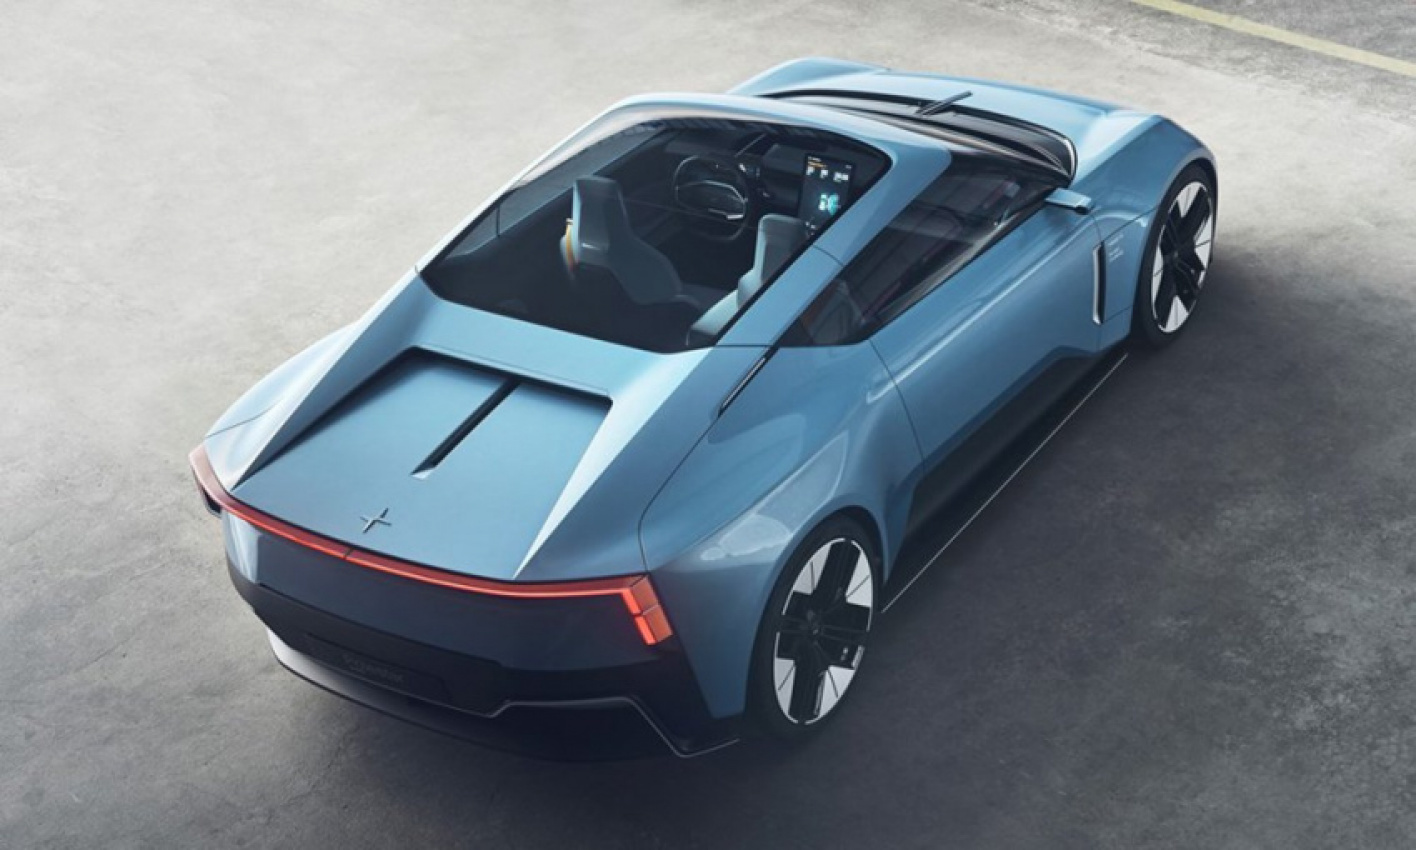 autos, cars, polestar, reviews, the stunning polestar o2 electric roadster concept comes with its own drone